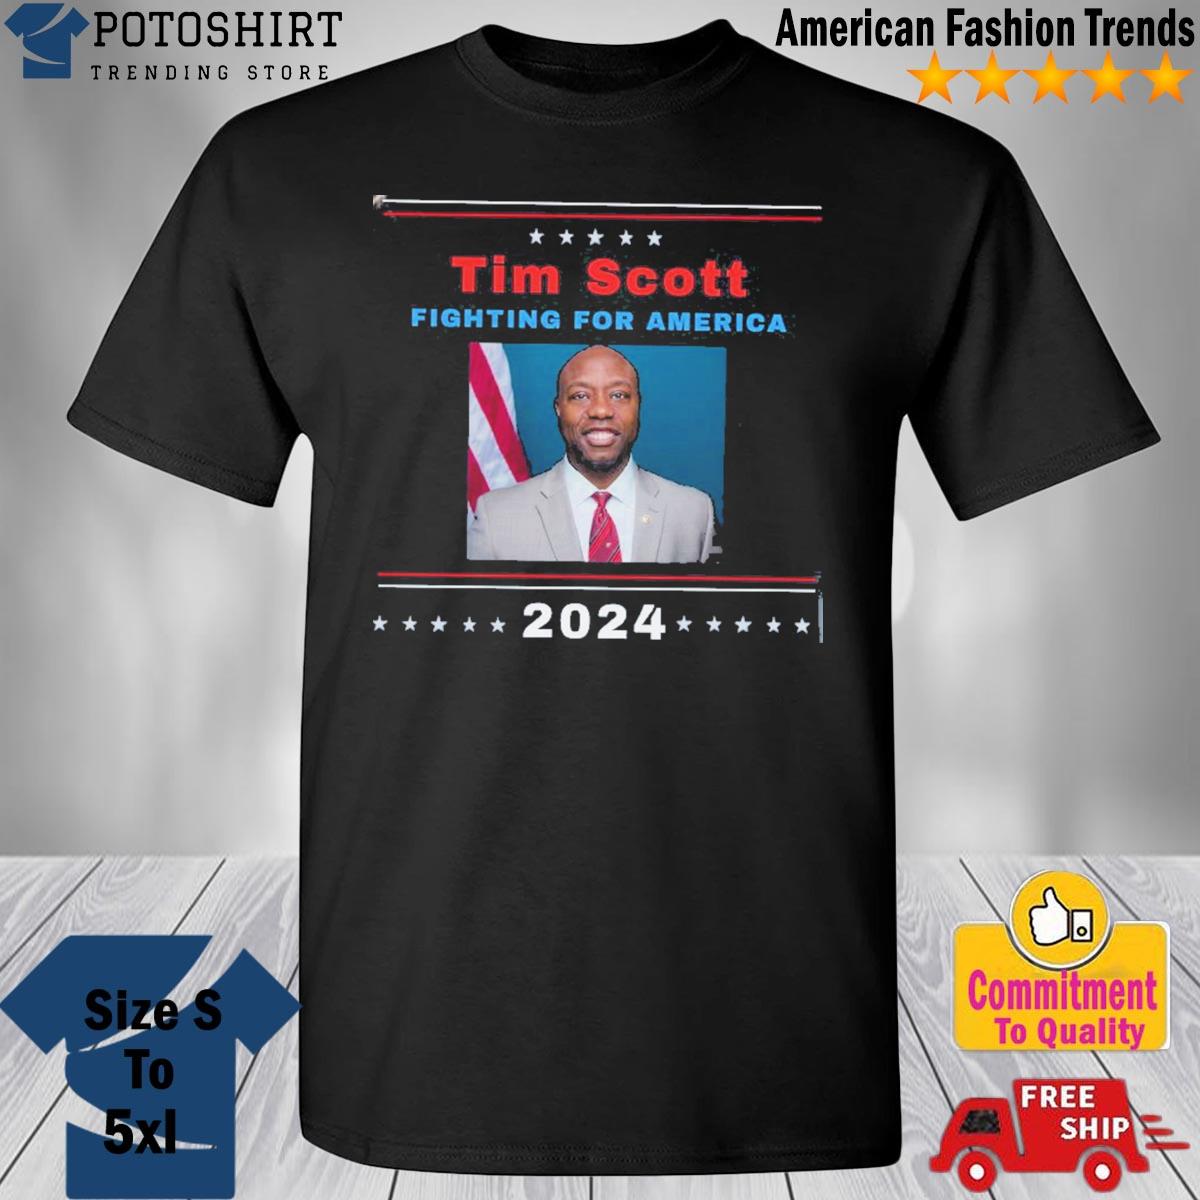 Tim Scott For President 2024, New Generation Great looking T-Shirt